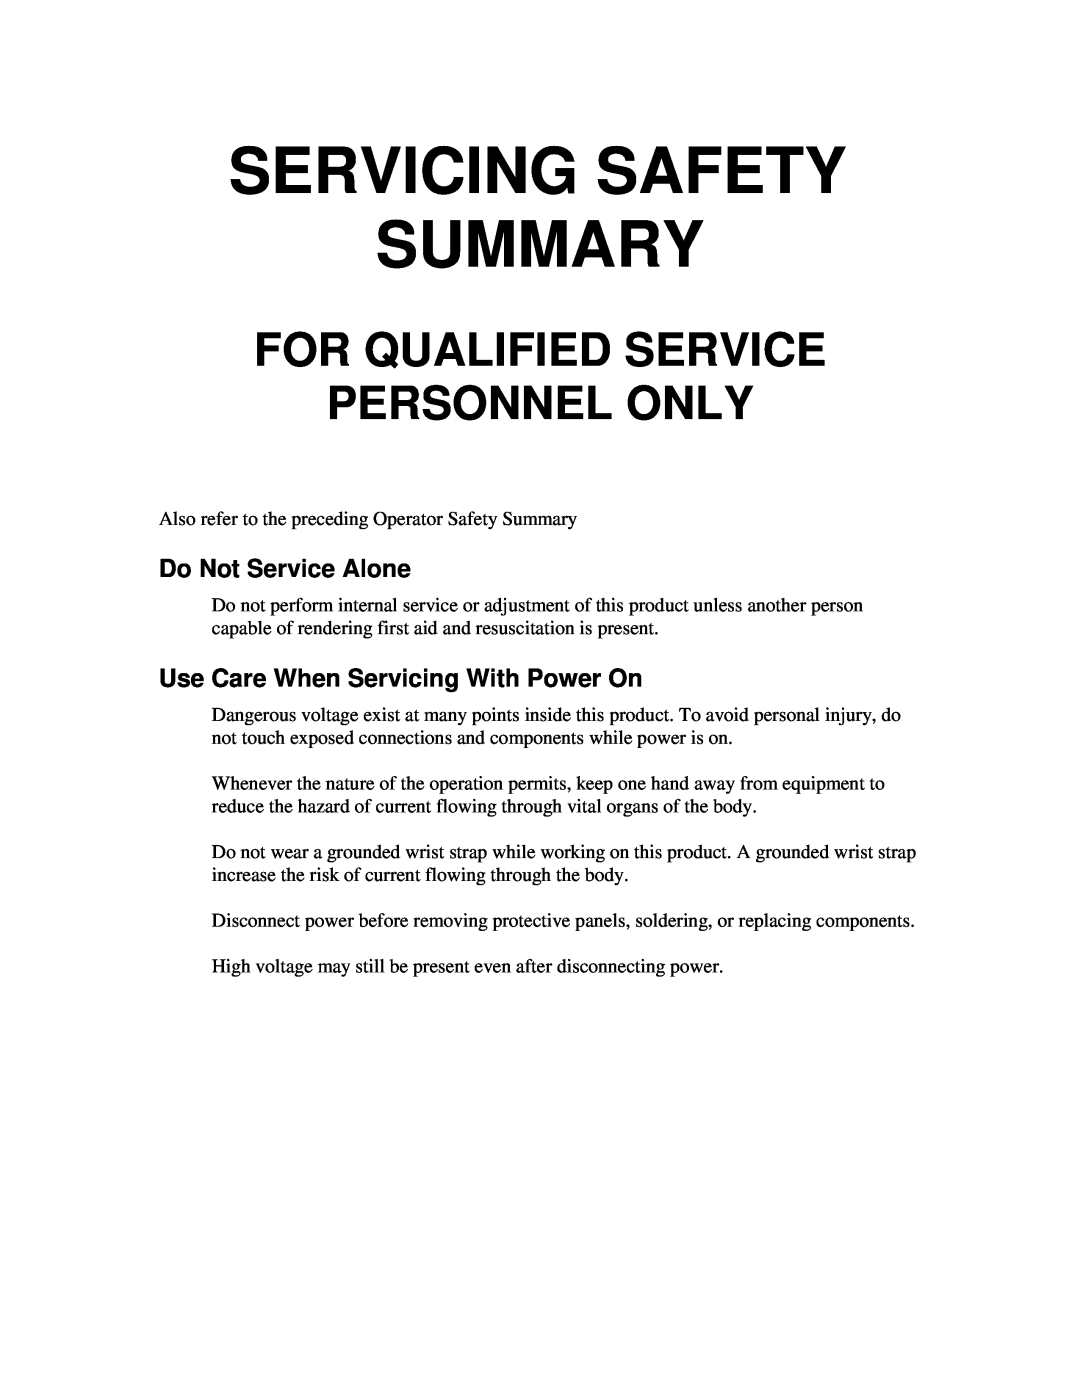 Fluke 5720A service manual Servicing Safety Summary, For Qualified Service Personnel Only, Do Not Service Alone 